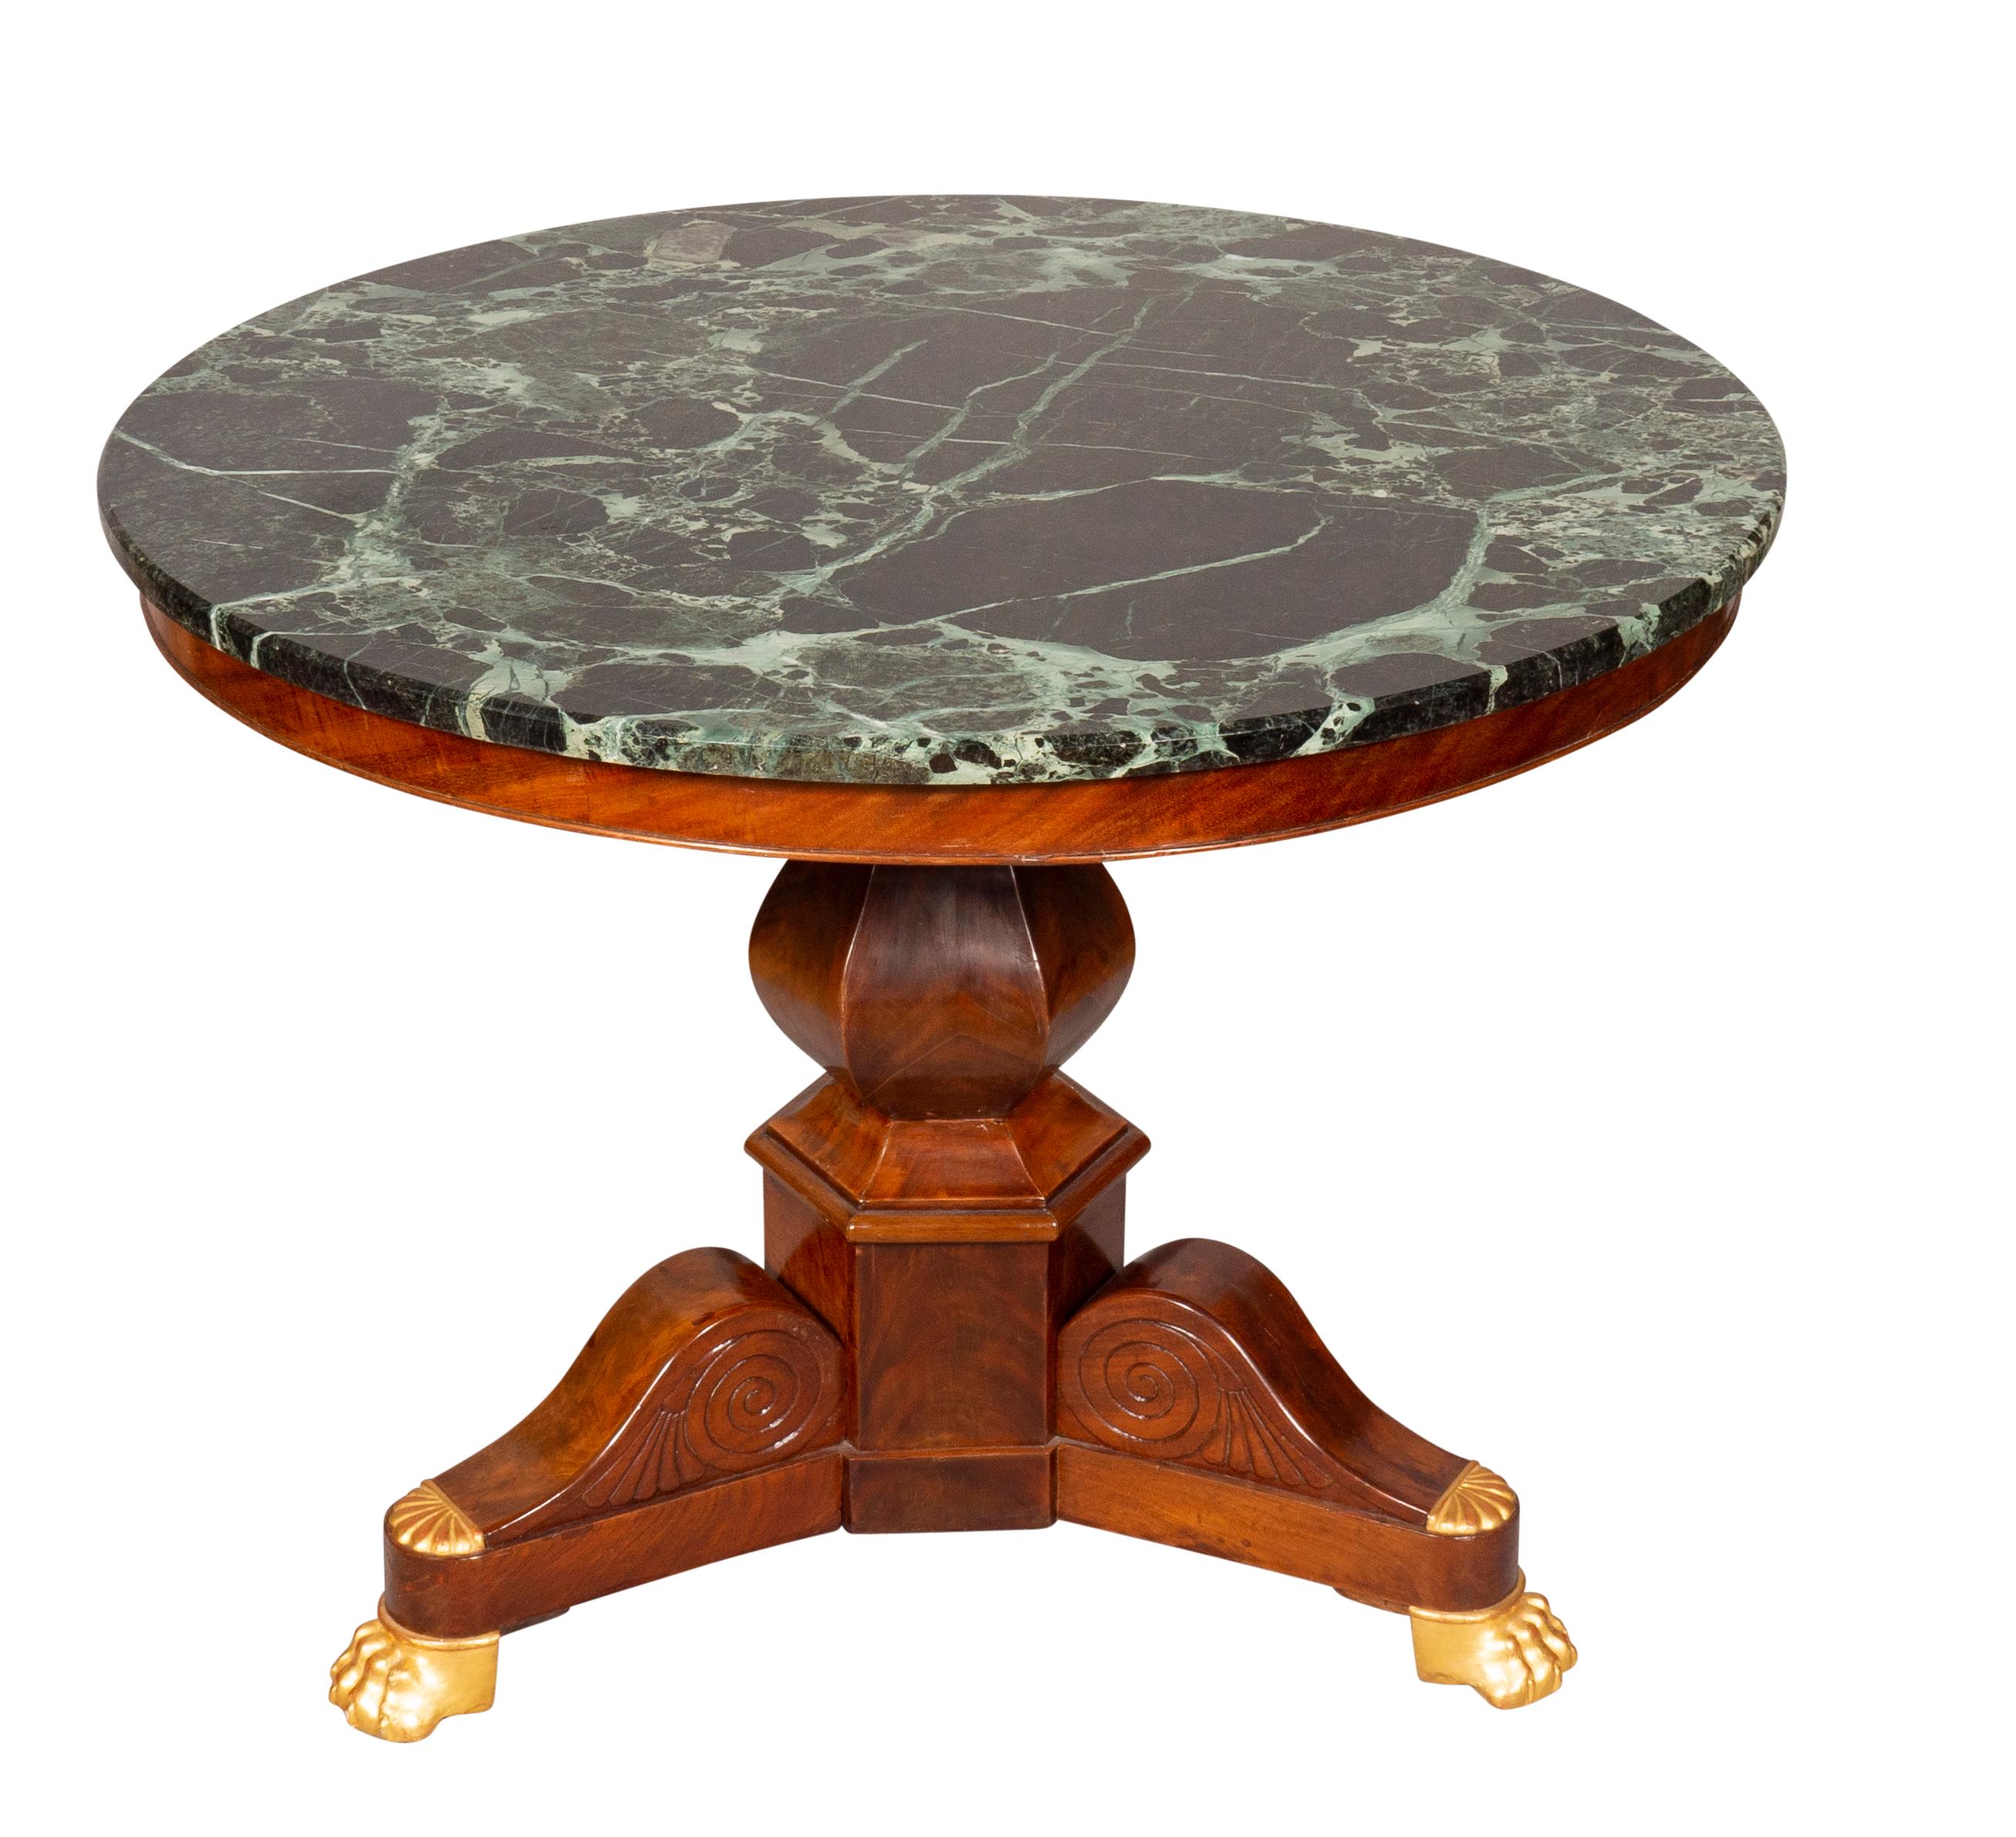 With circular antico verde marble top and shaped columnar support, tripartite base with carved volutes.